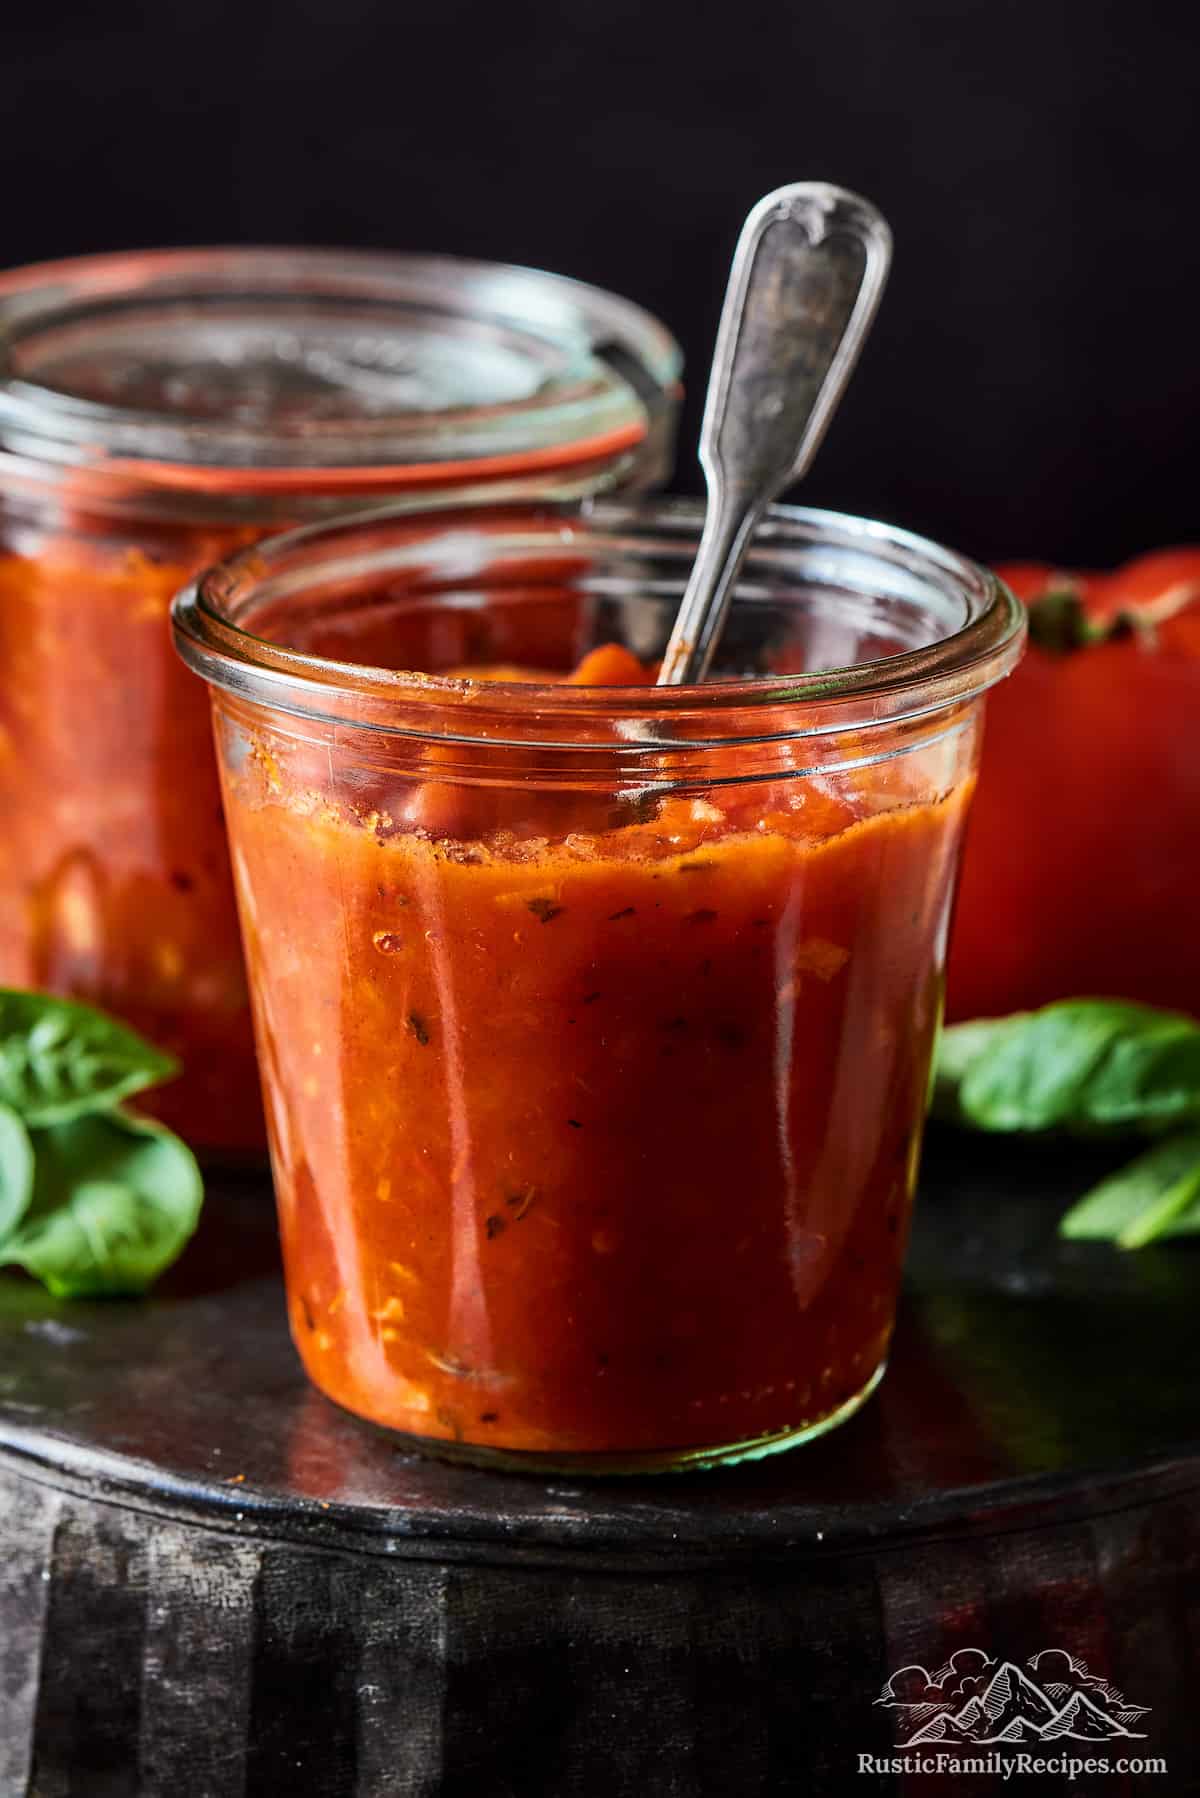 Pasta sauce in jars, one with a spoon